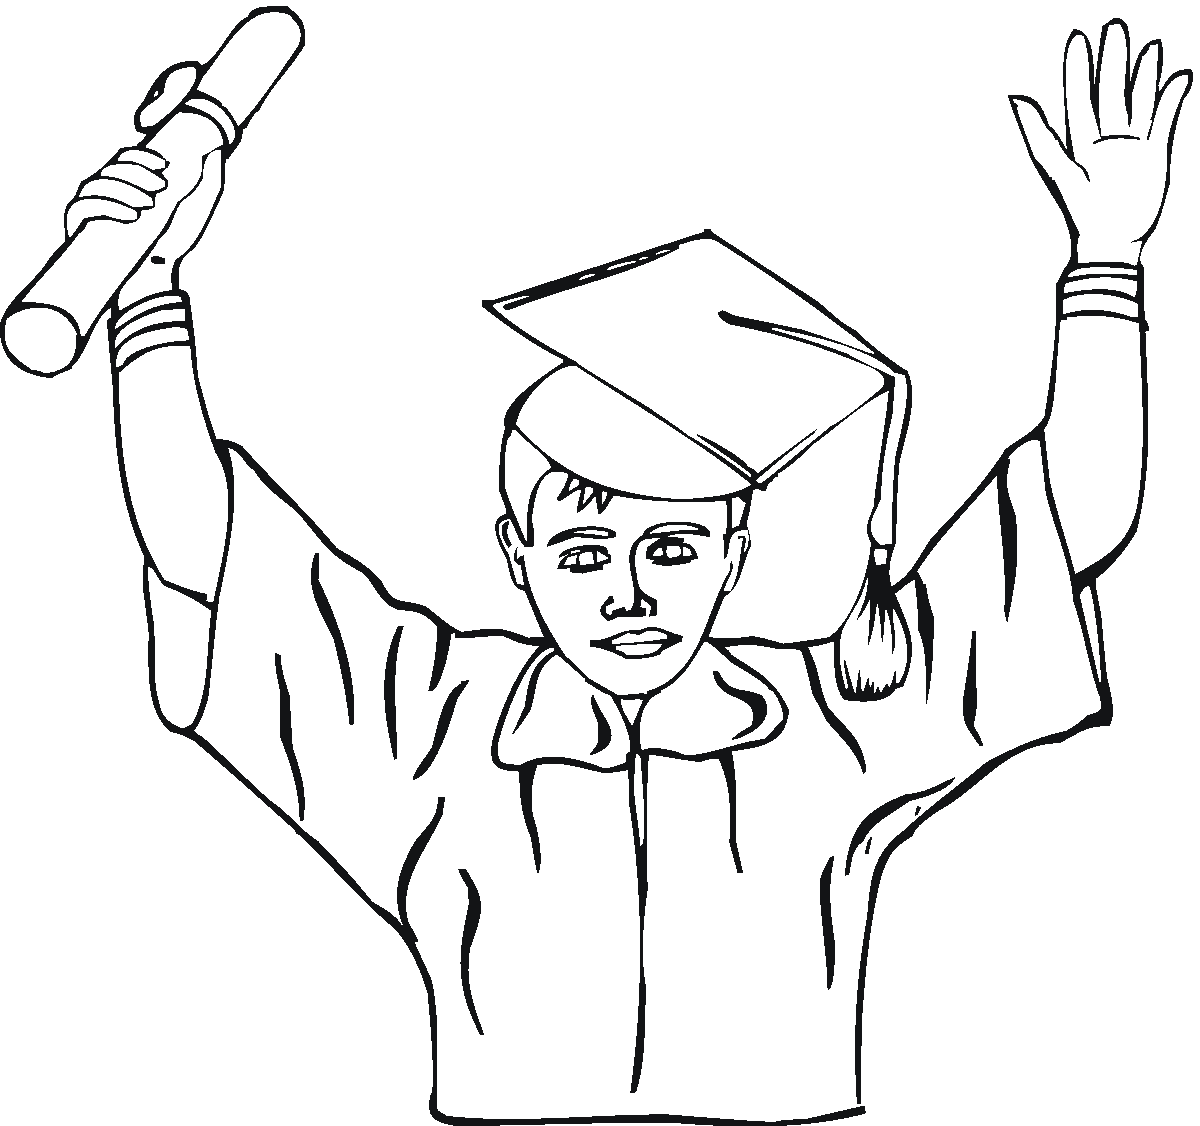 Graduation Boy Coloring Pages Free Printable For KIds